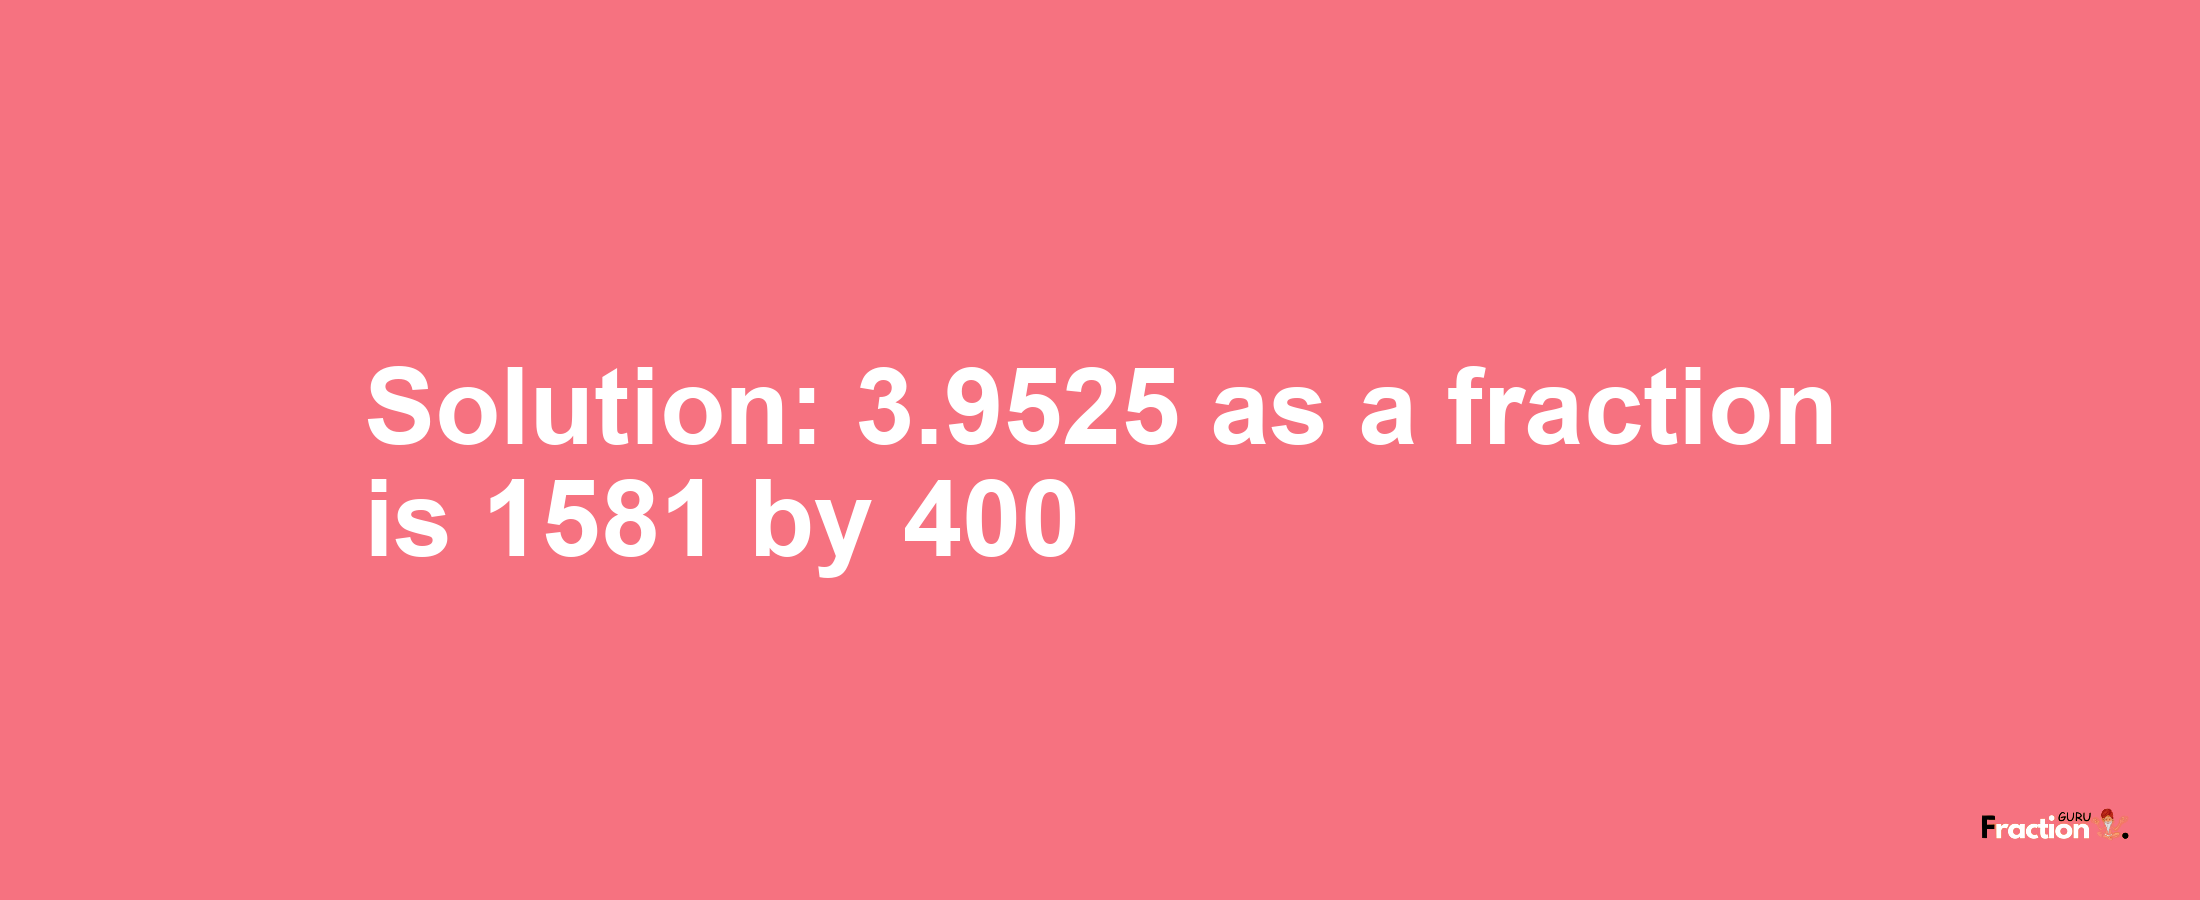 Solution:3.9525 as a fraction is 1581/400